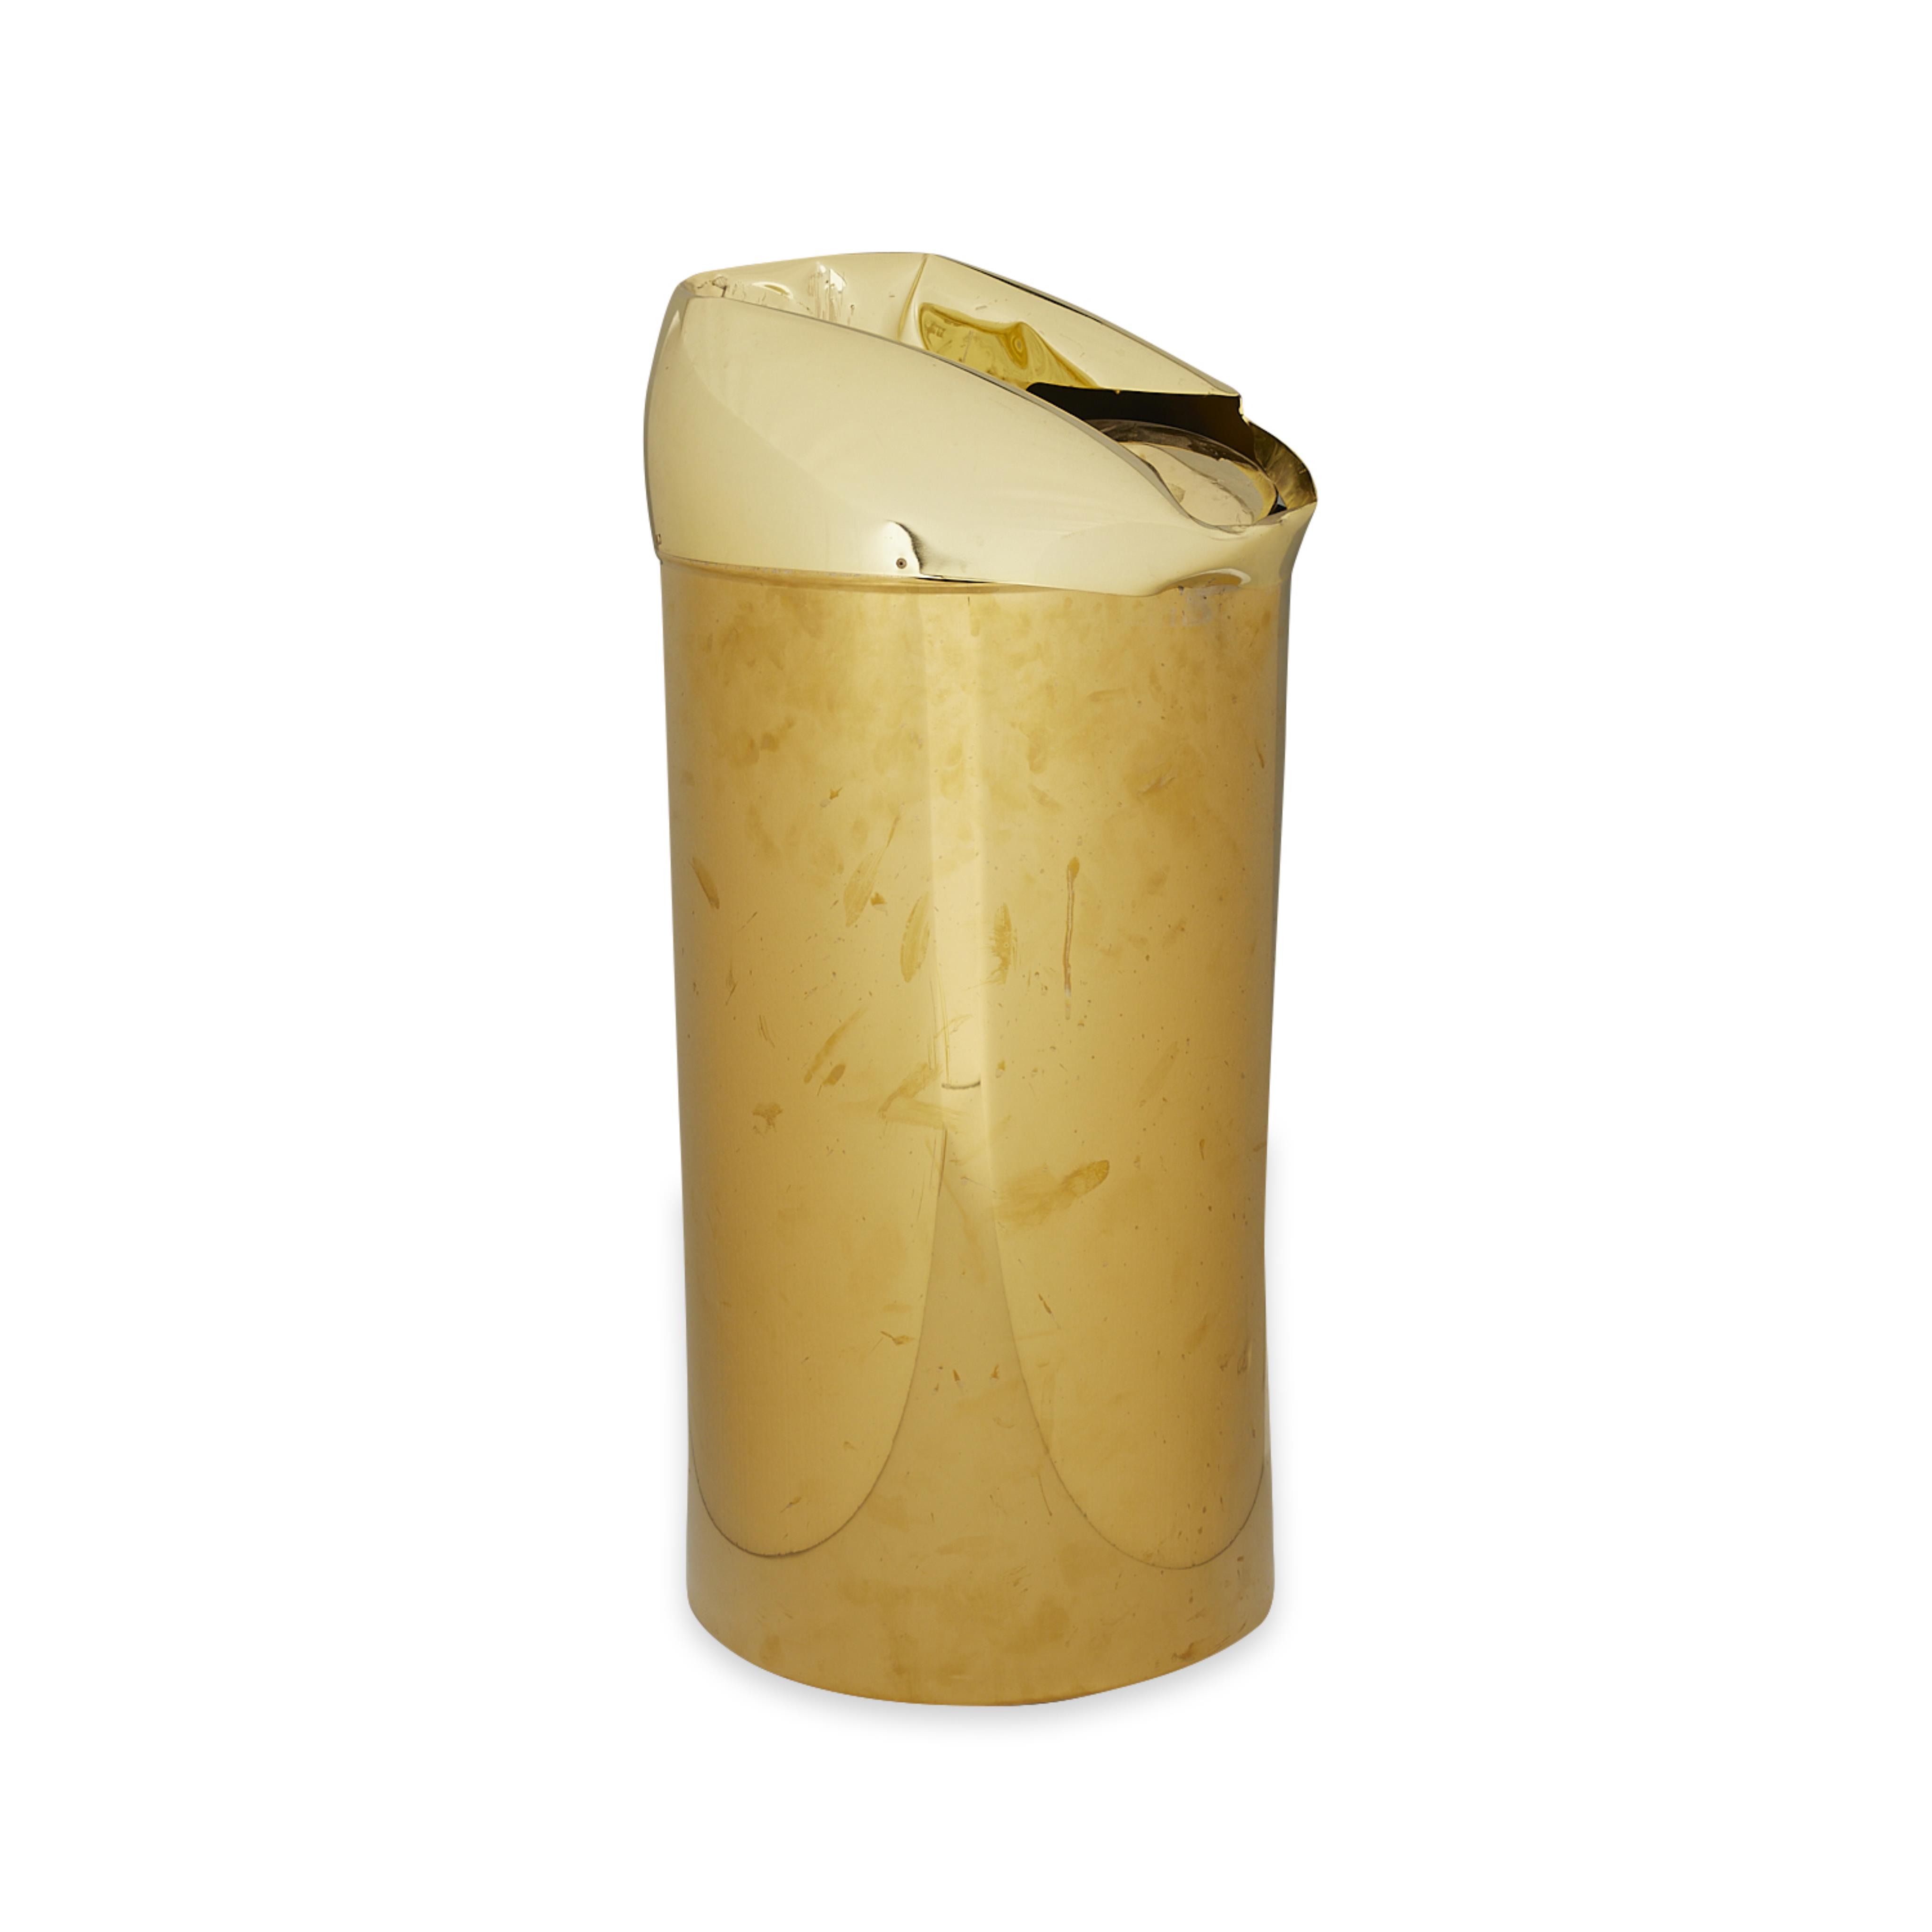 Joe Smith Gold-Tone Garbage Can 2008 - Image 6 of 12